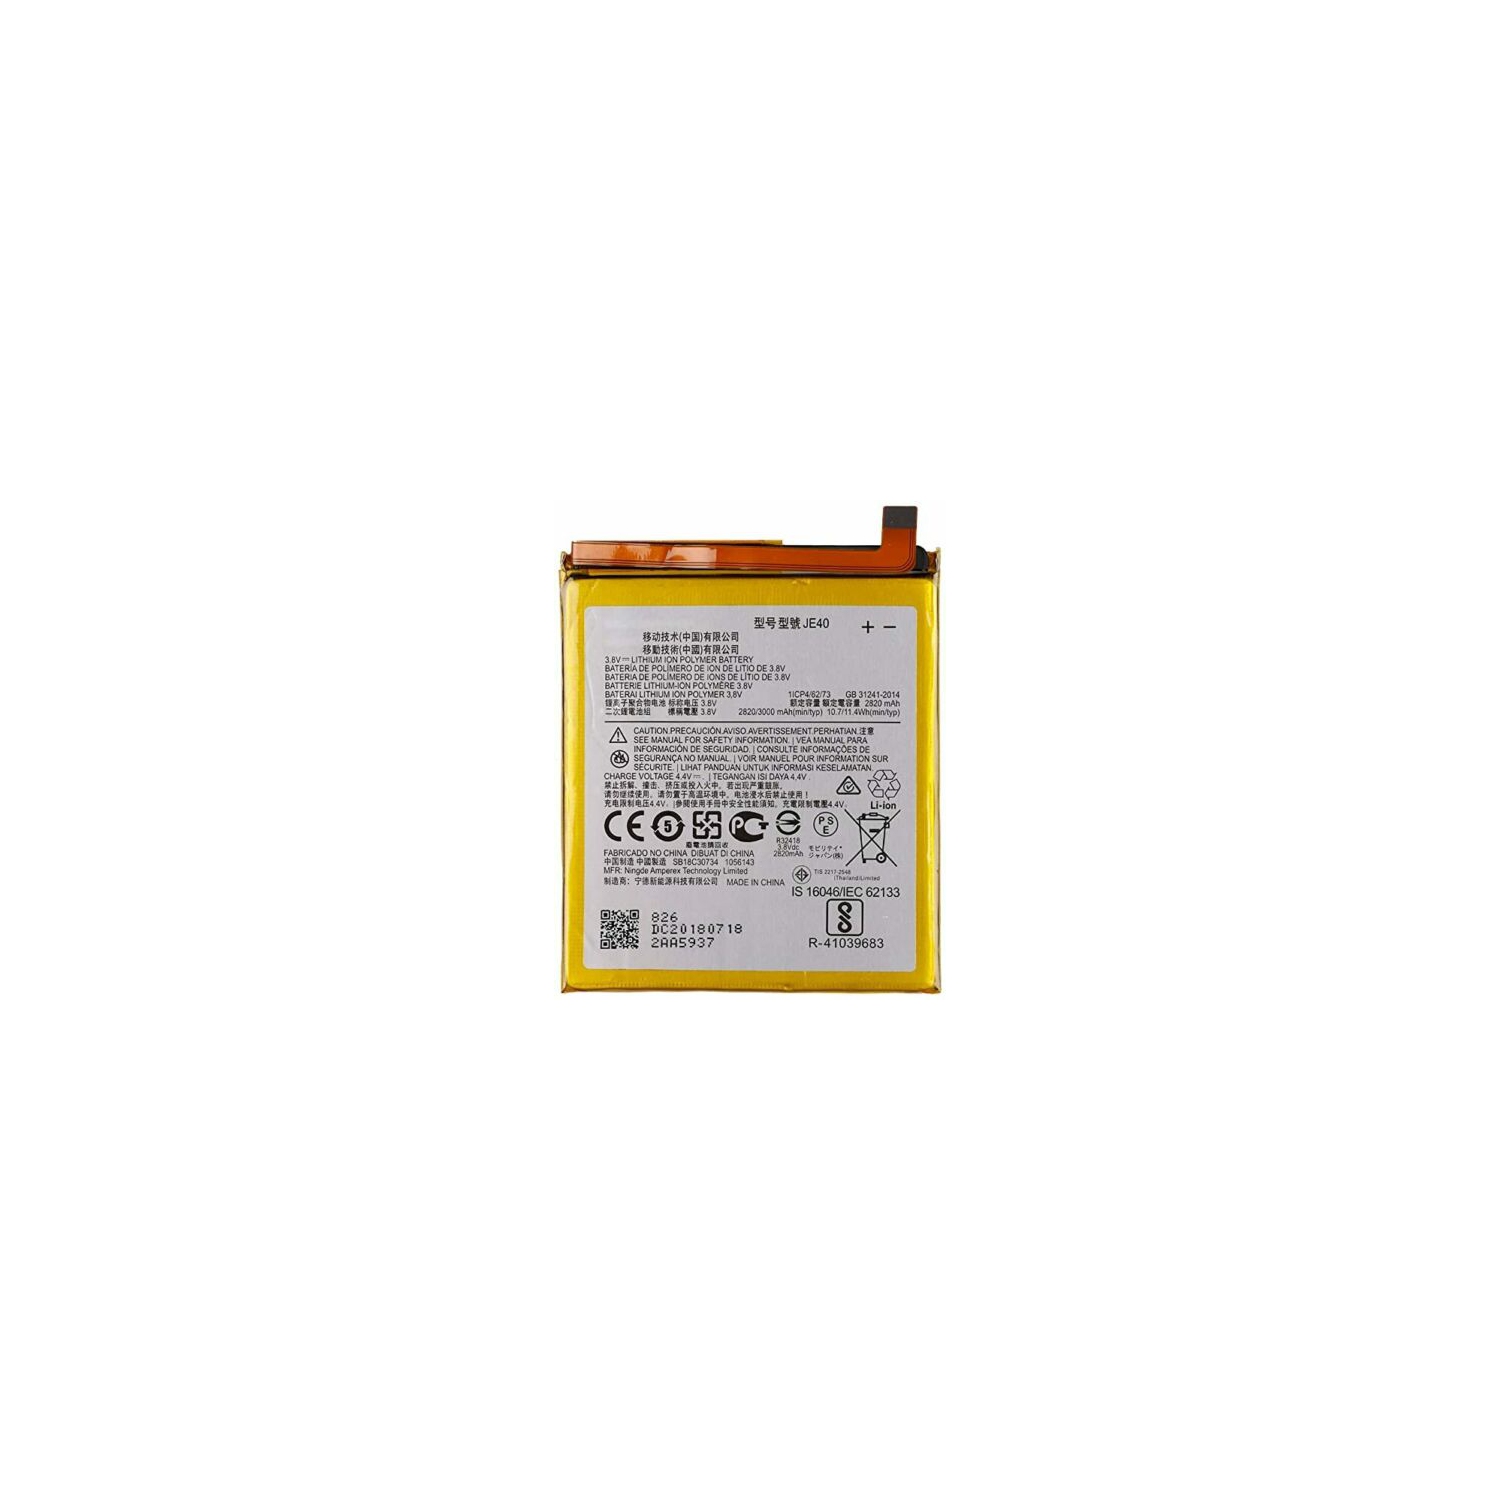 Replacement Battery for Motorola Moto G7 Play / Z3, JE40